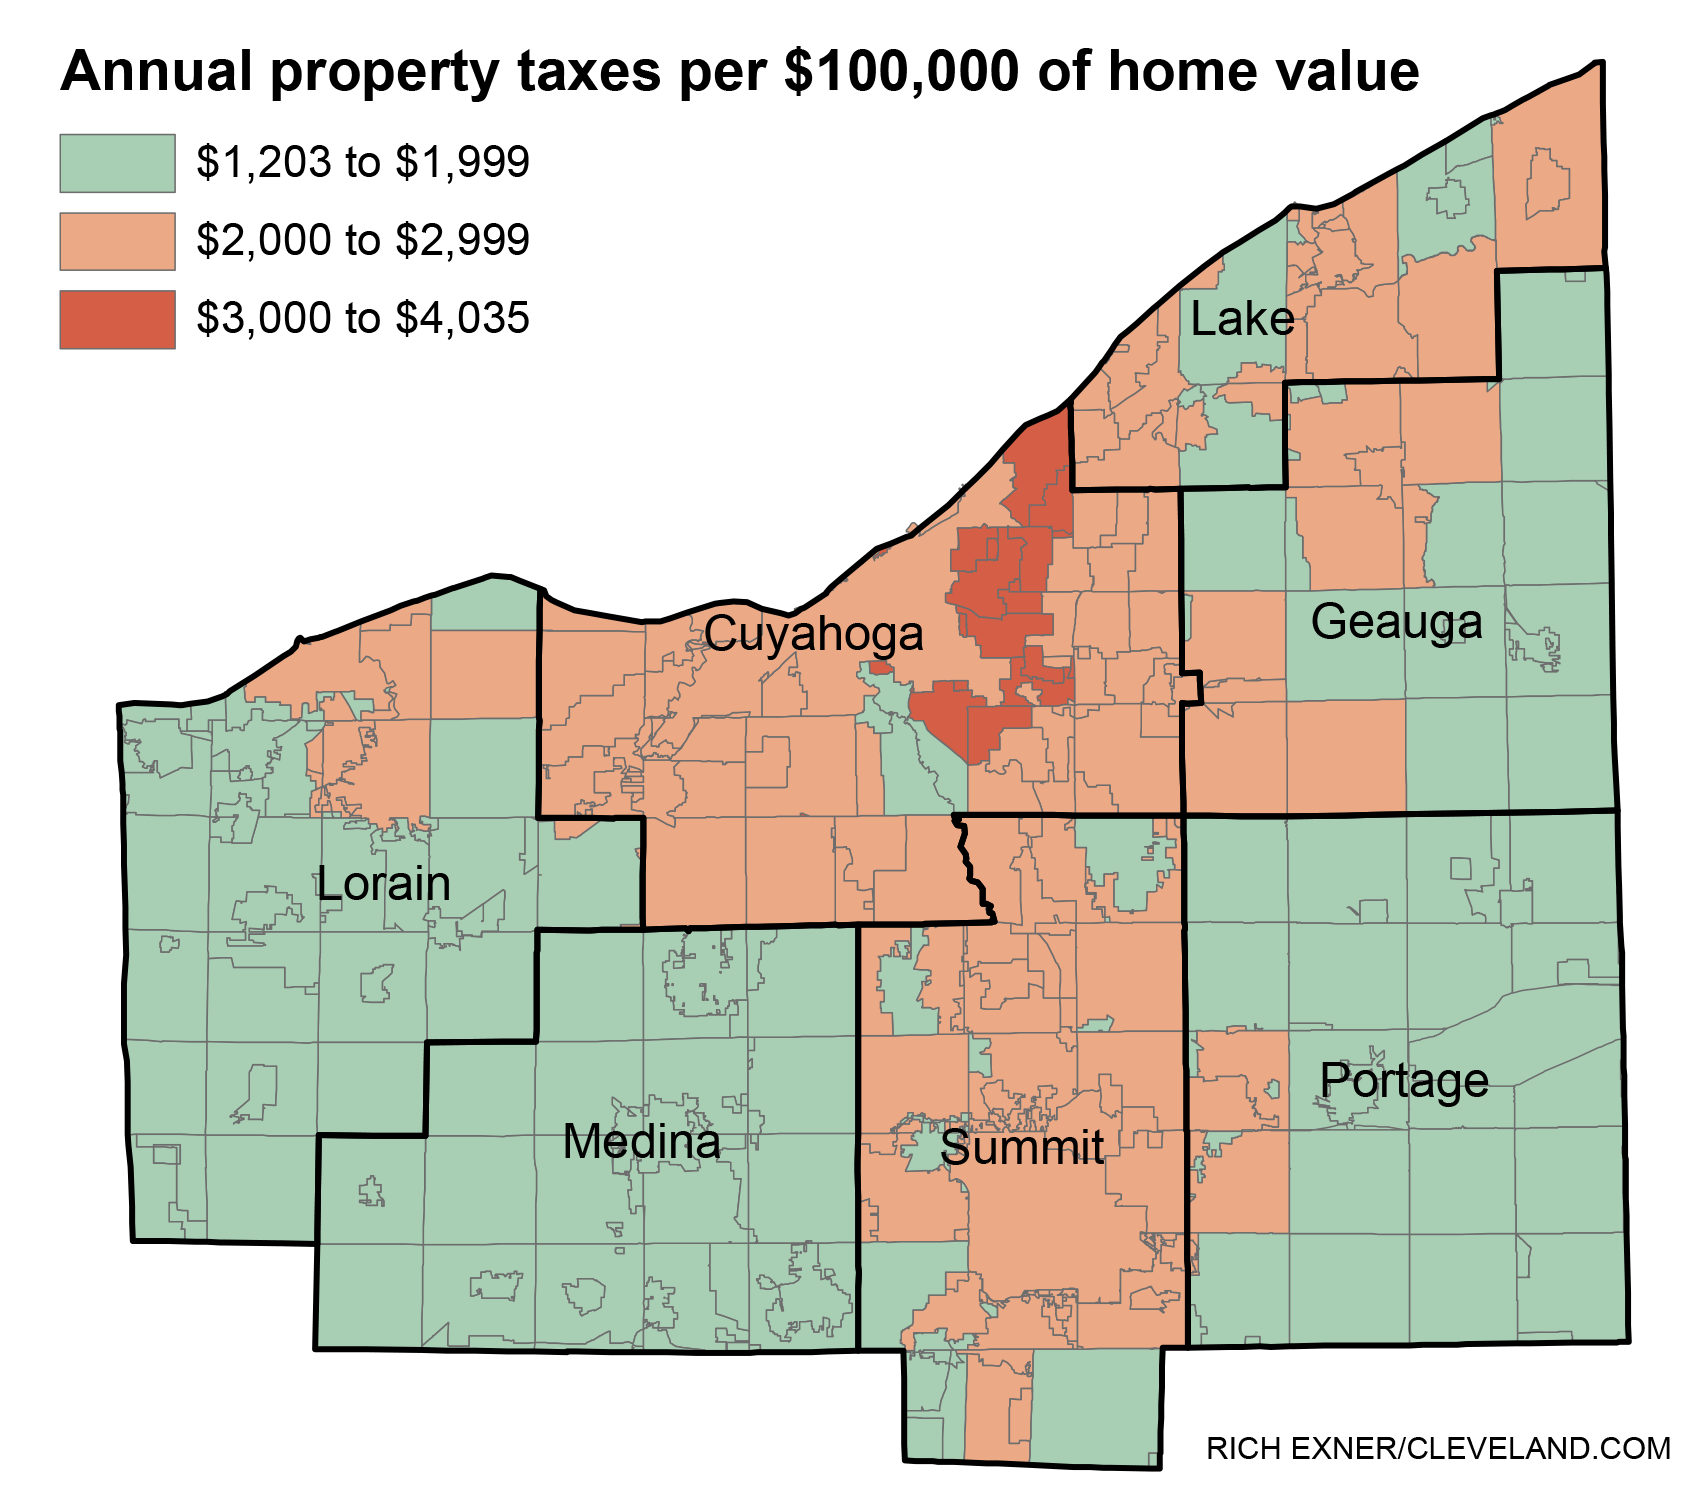 Greater Cleveland S Wide Spread In Property Tax Rates See Where